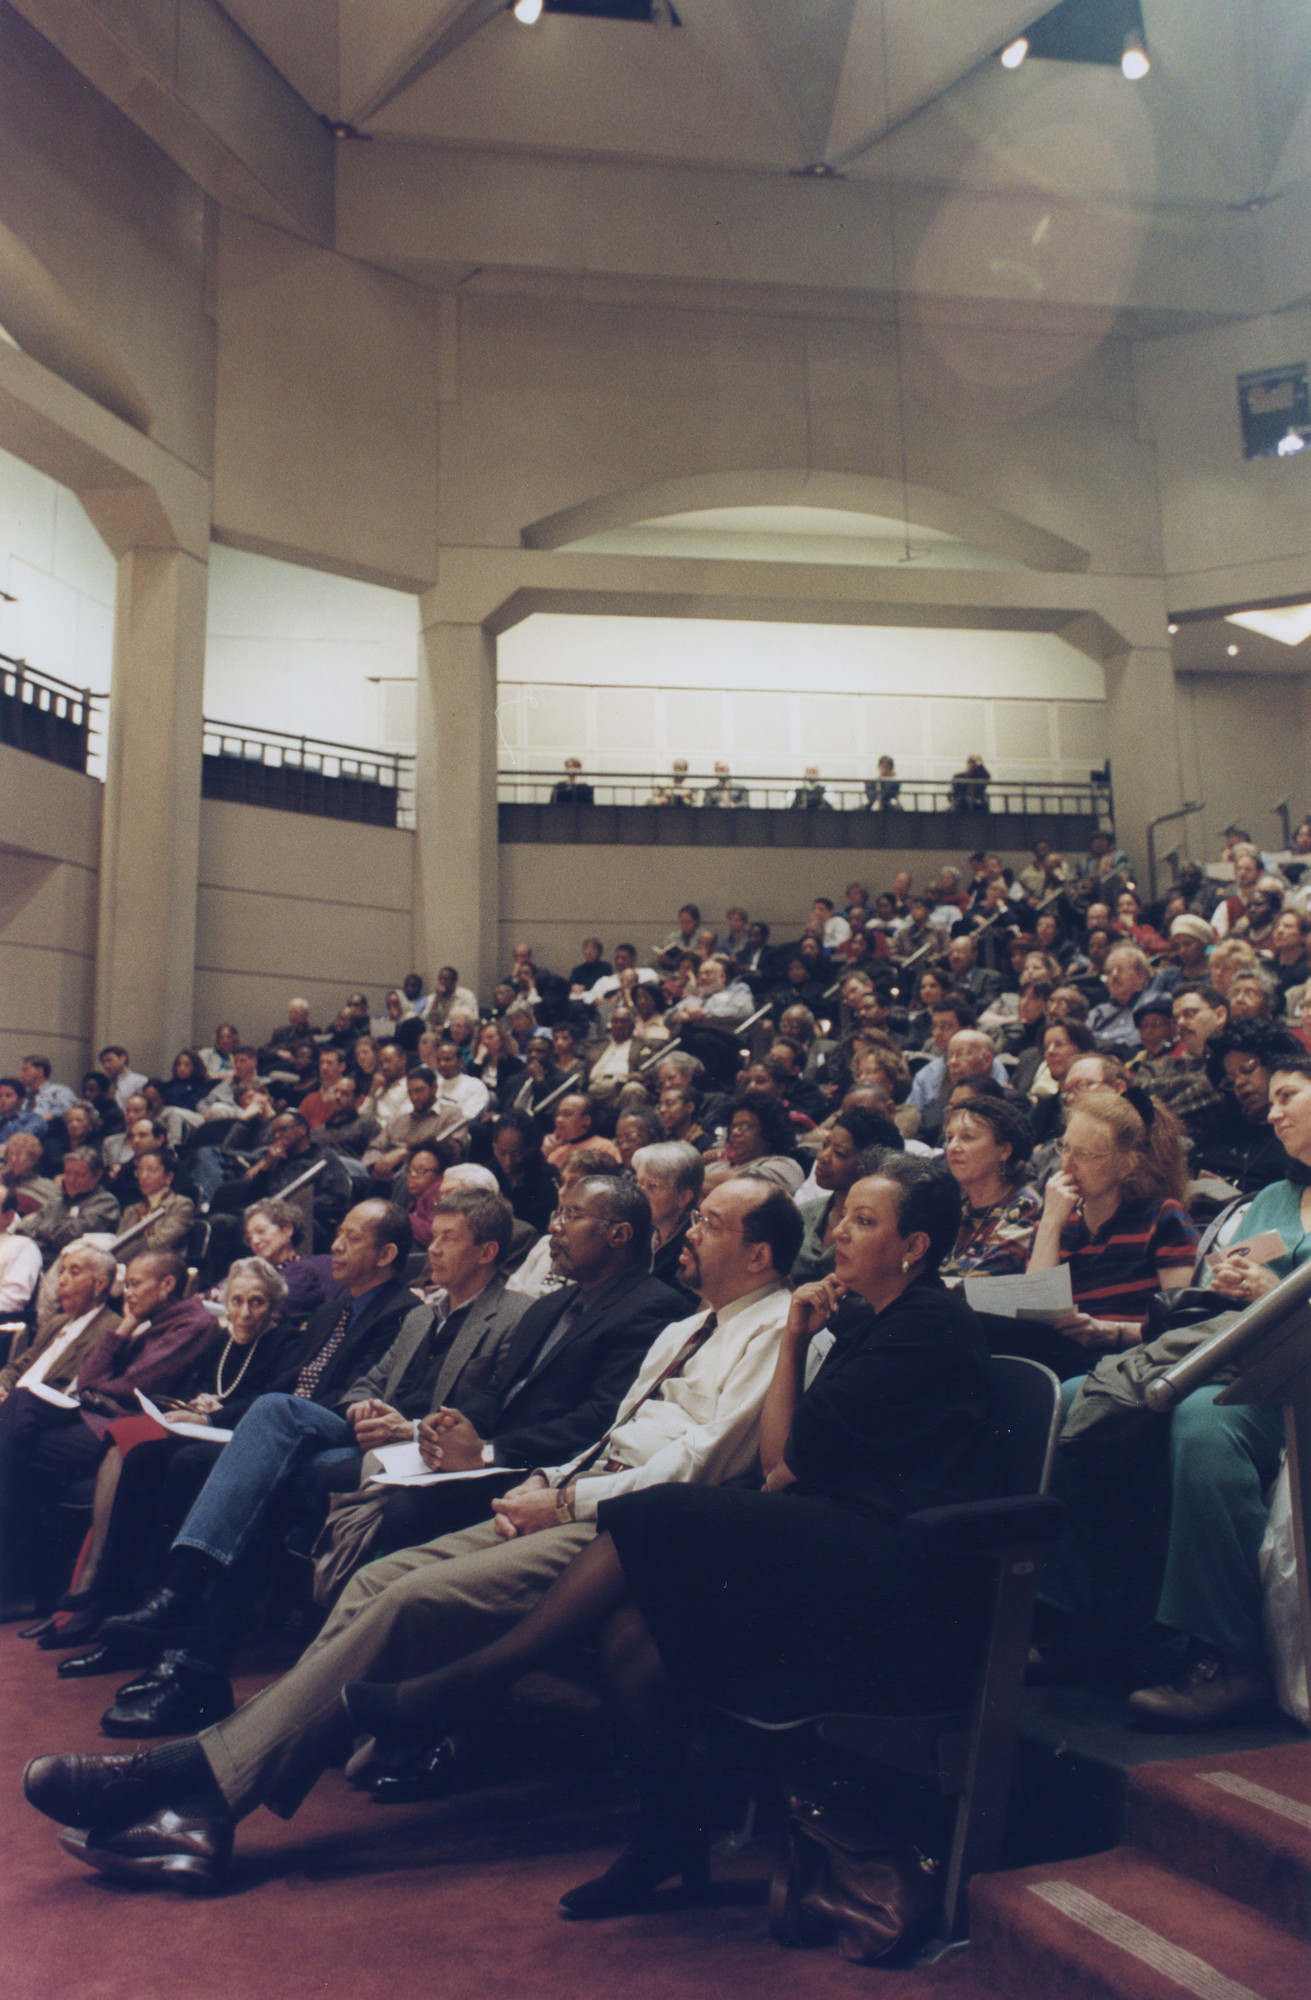 View of the audience at the "Evening with Hans J. Massaquoi" program at the U.S. Holocaust Memorial Museum.

The interview, conducted by Oral History Director Joan Ringelheim, is a public program of the U.S. Holocaust Memorial Museum.